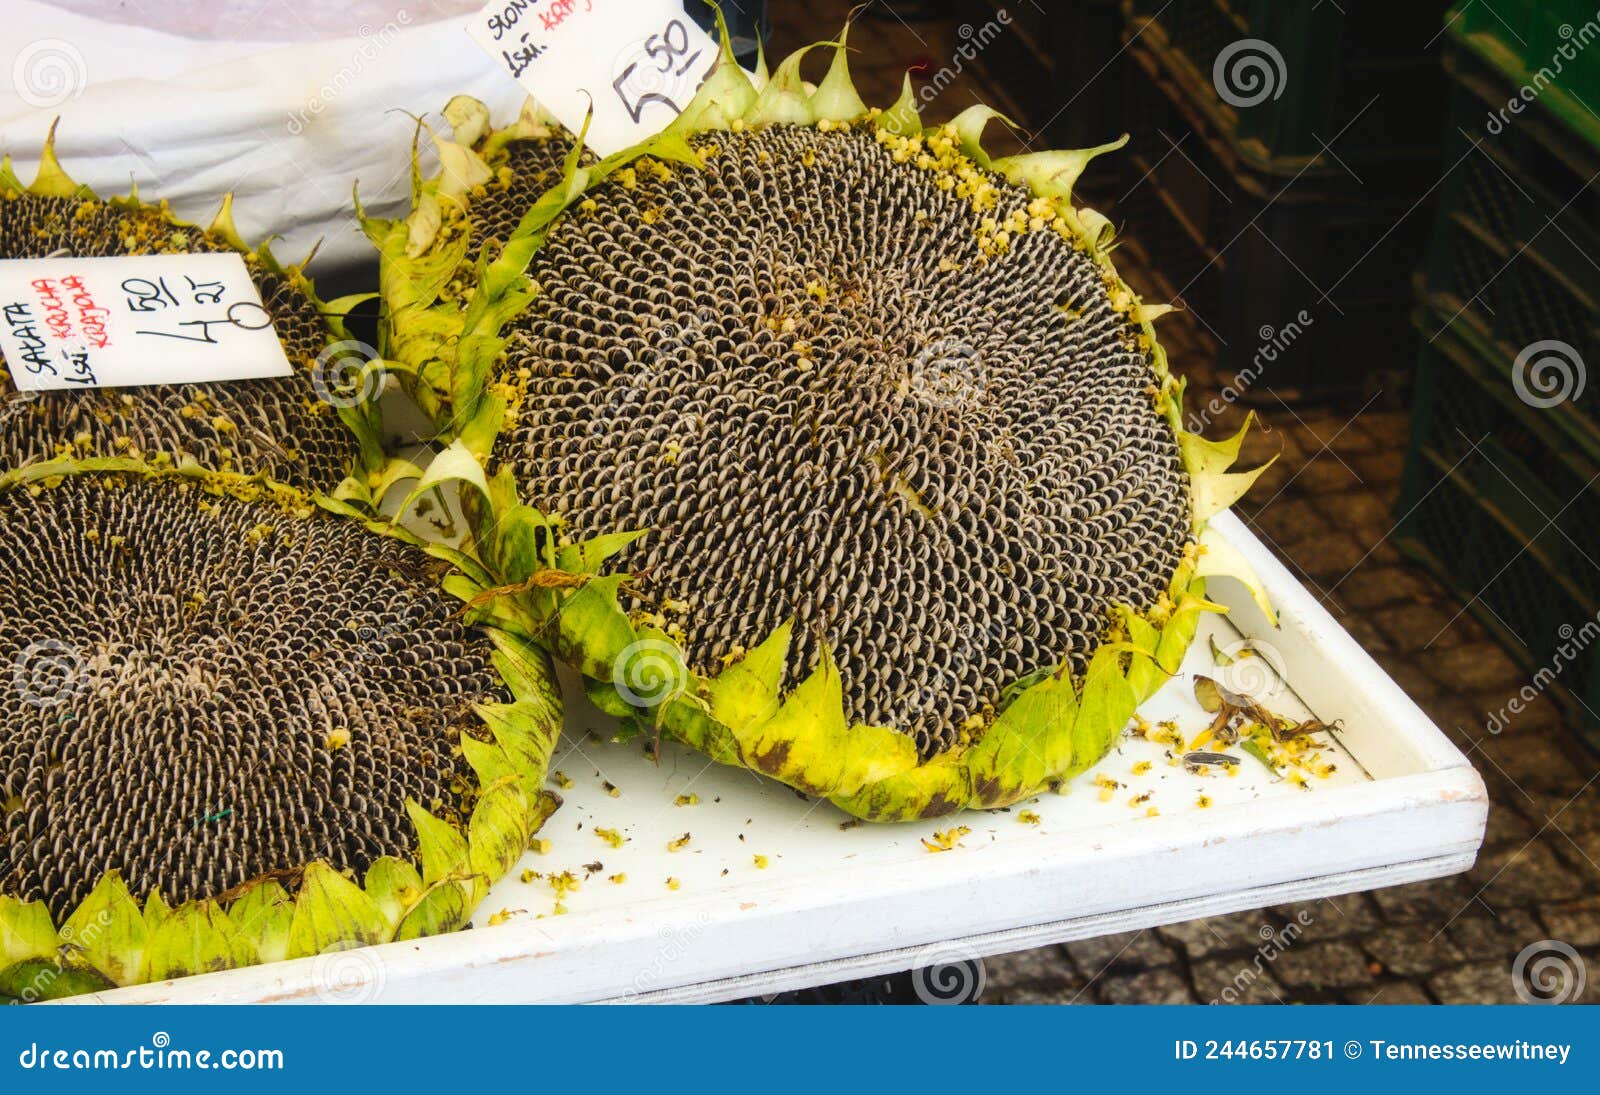 Large Sunflower Head with Seeds Being Sold at a Food Market Stock Image ...